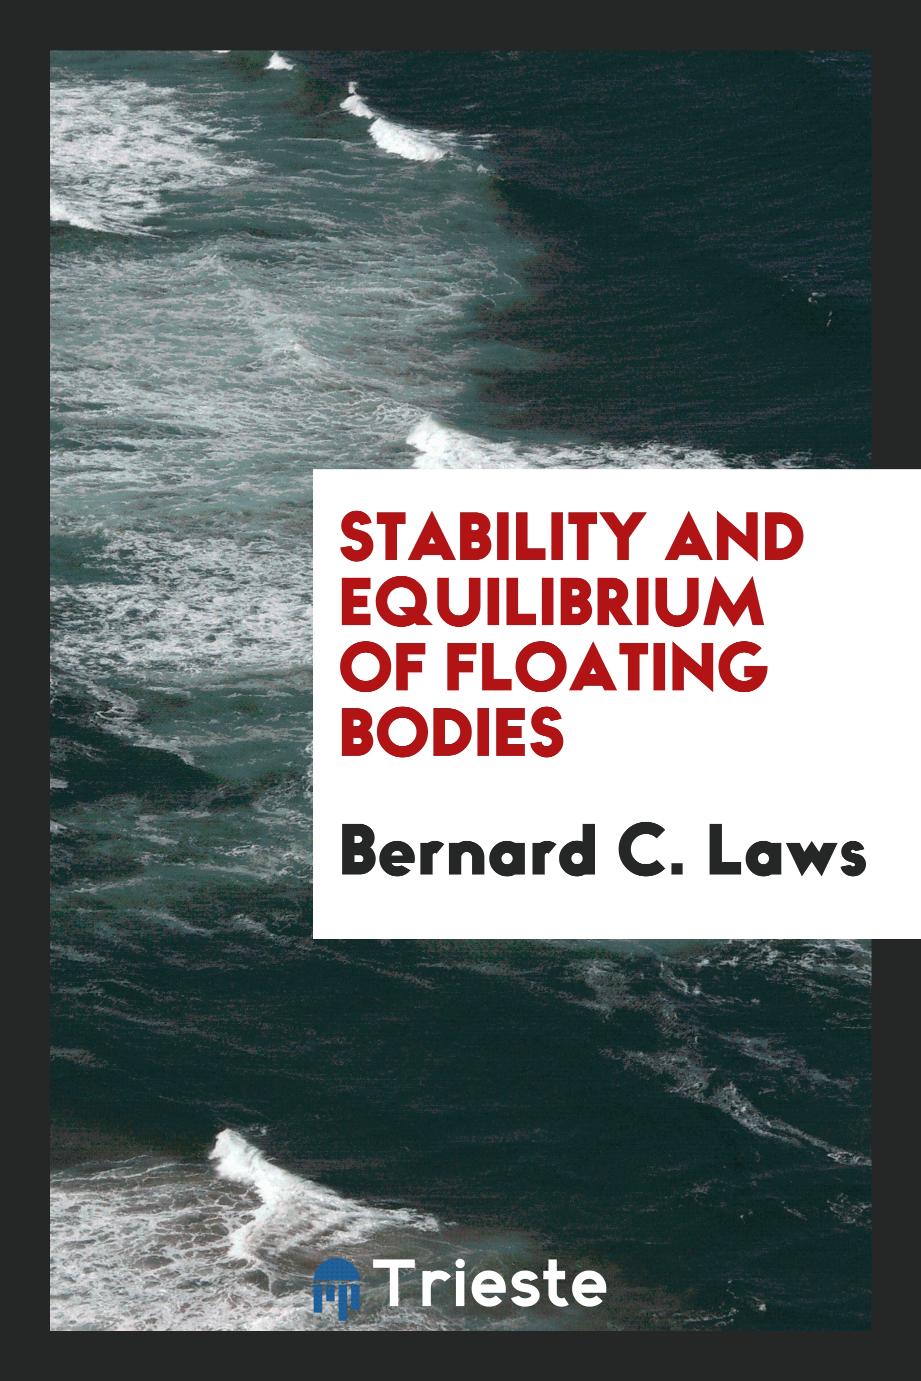 Stability and equilibrium of floating bodies